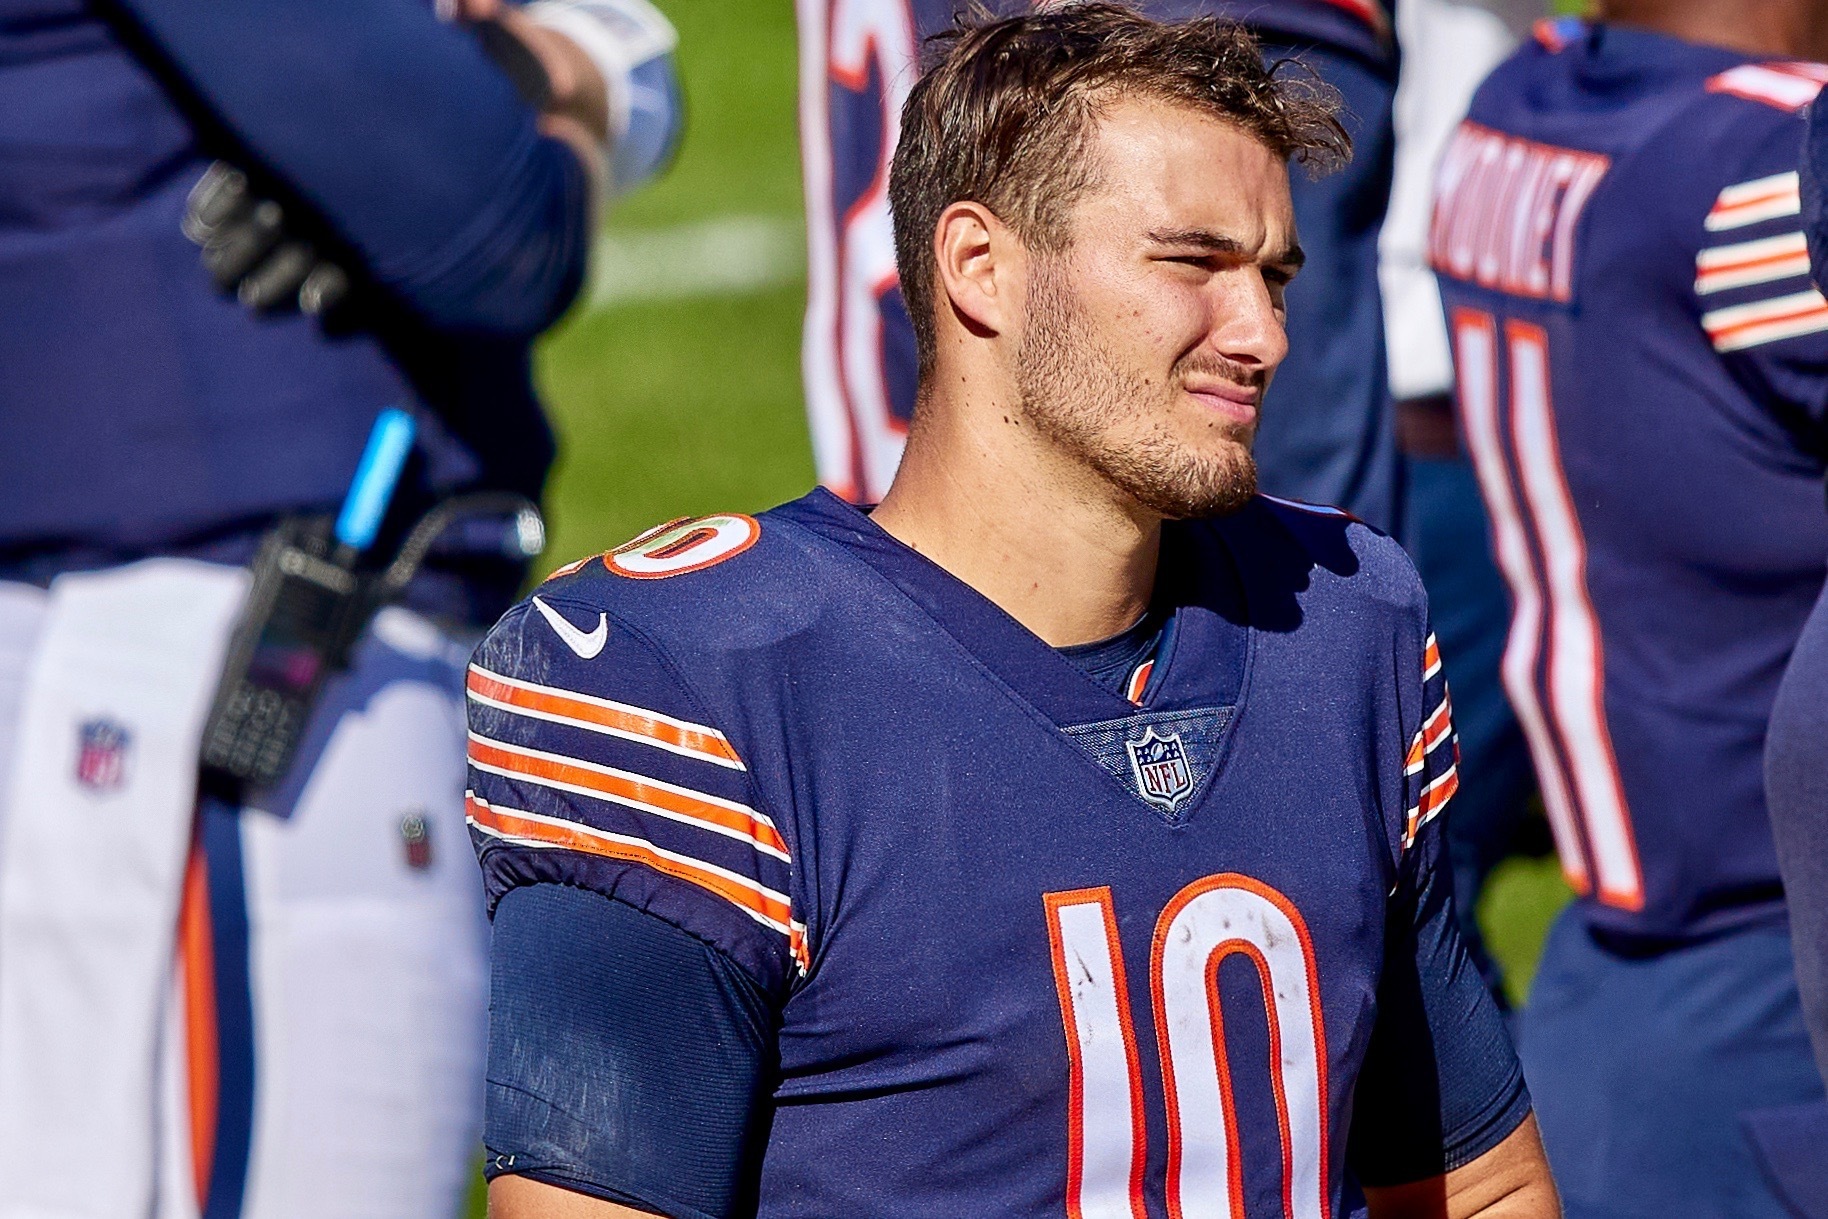 Why? How? The Bears, Trubisky and the Fateful 2017 NFL Draft